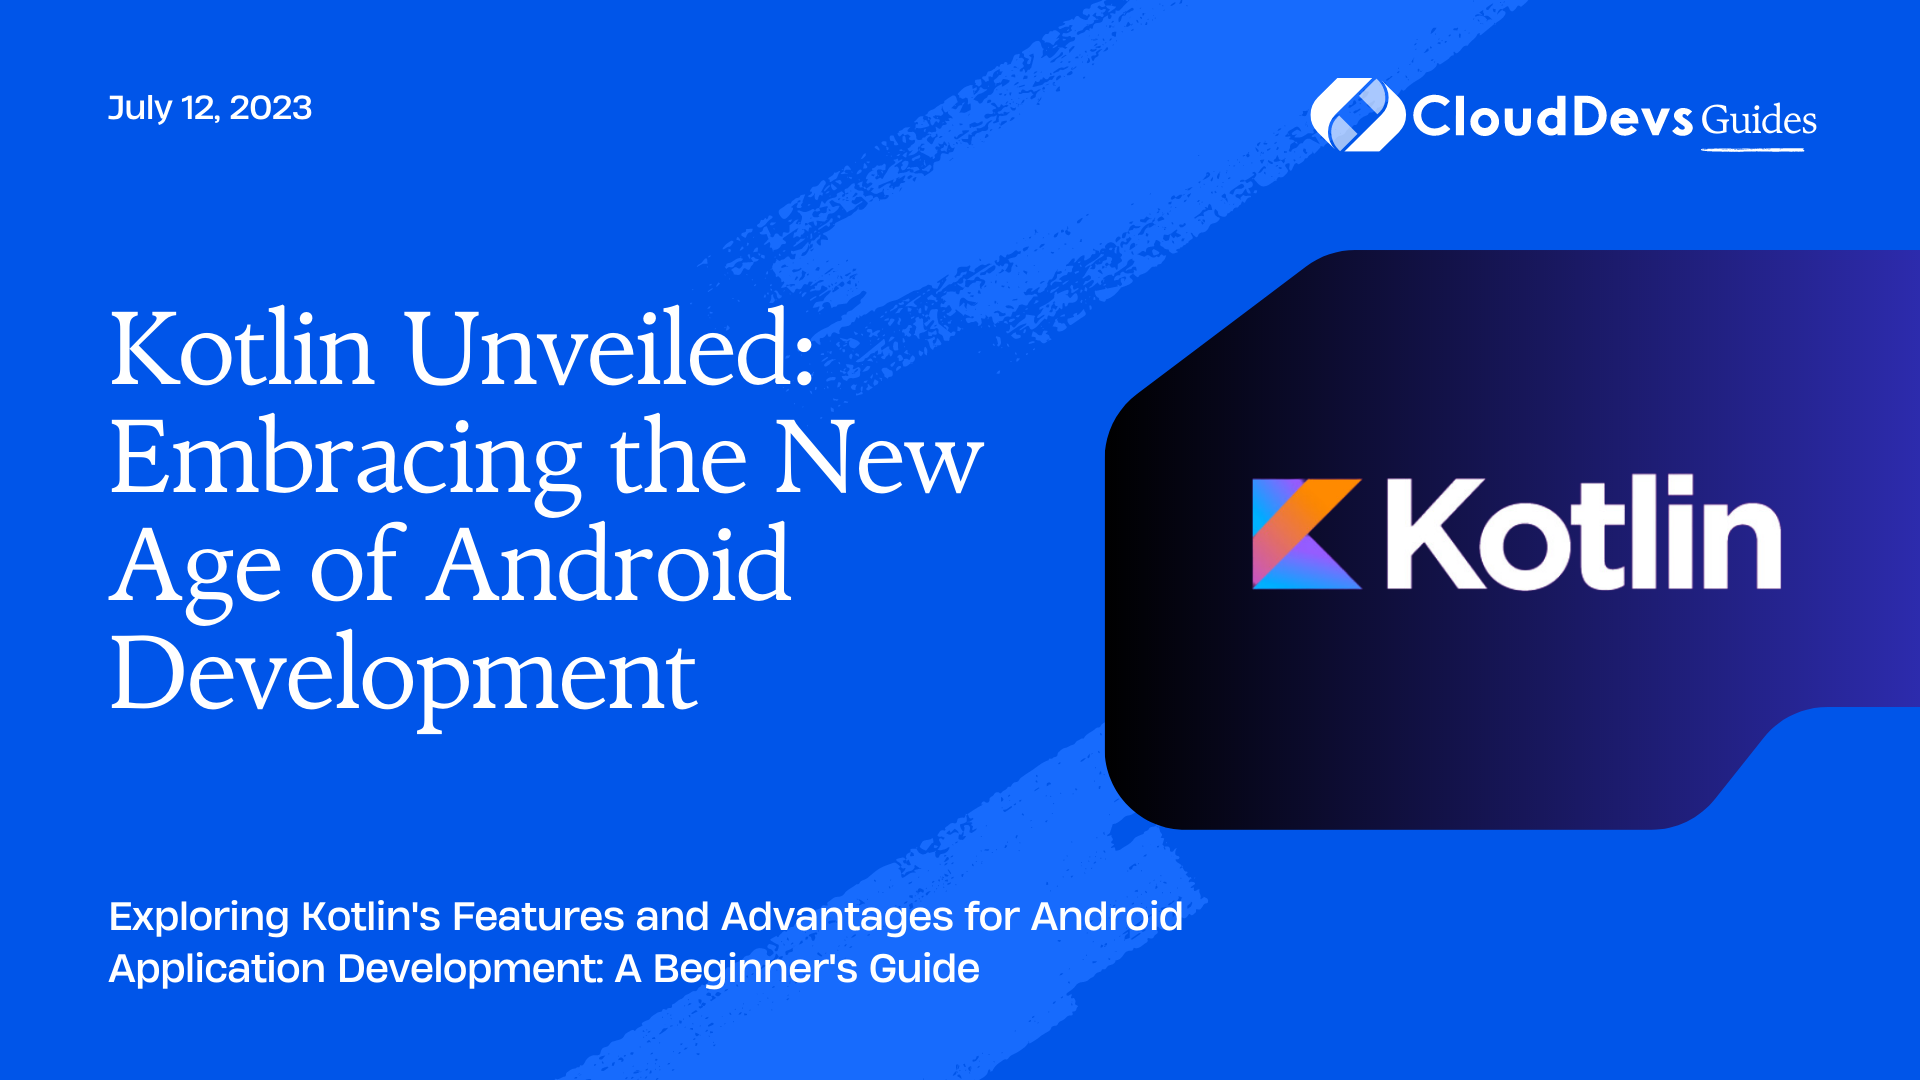 Kotlin Unveiled: Embracing the New Age of Android Development